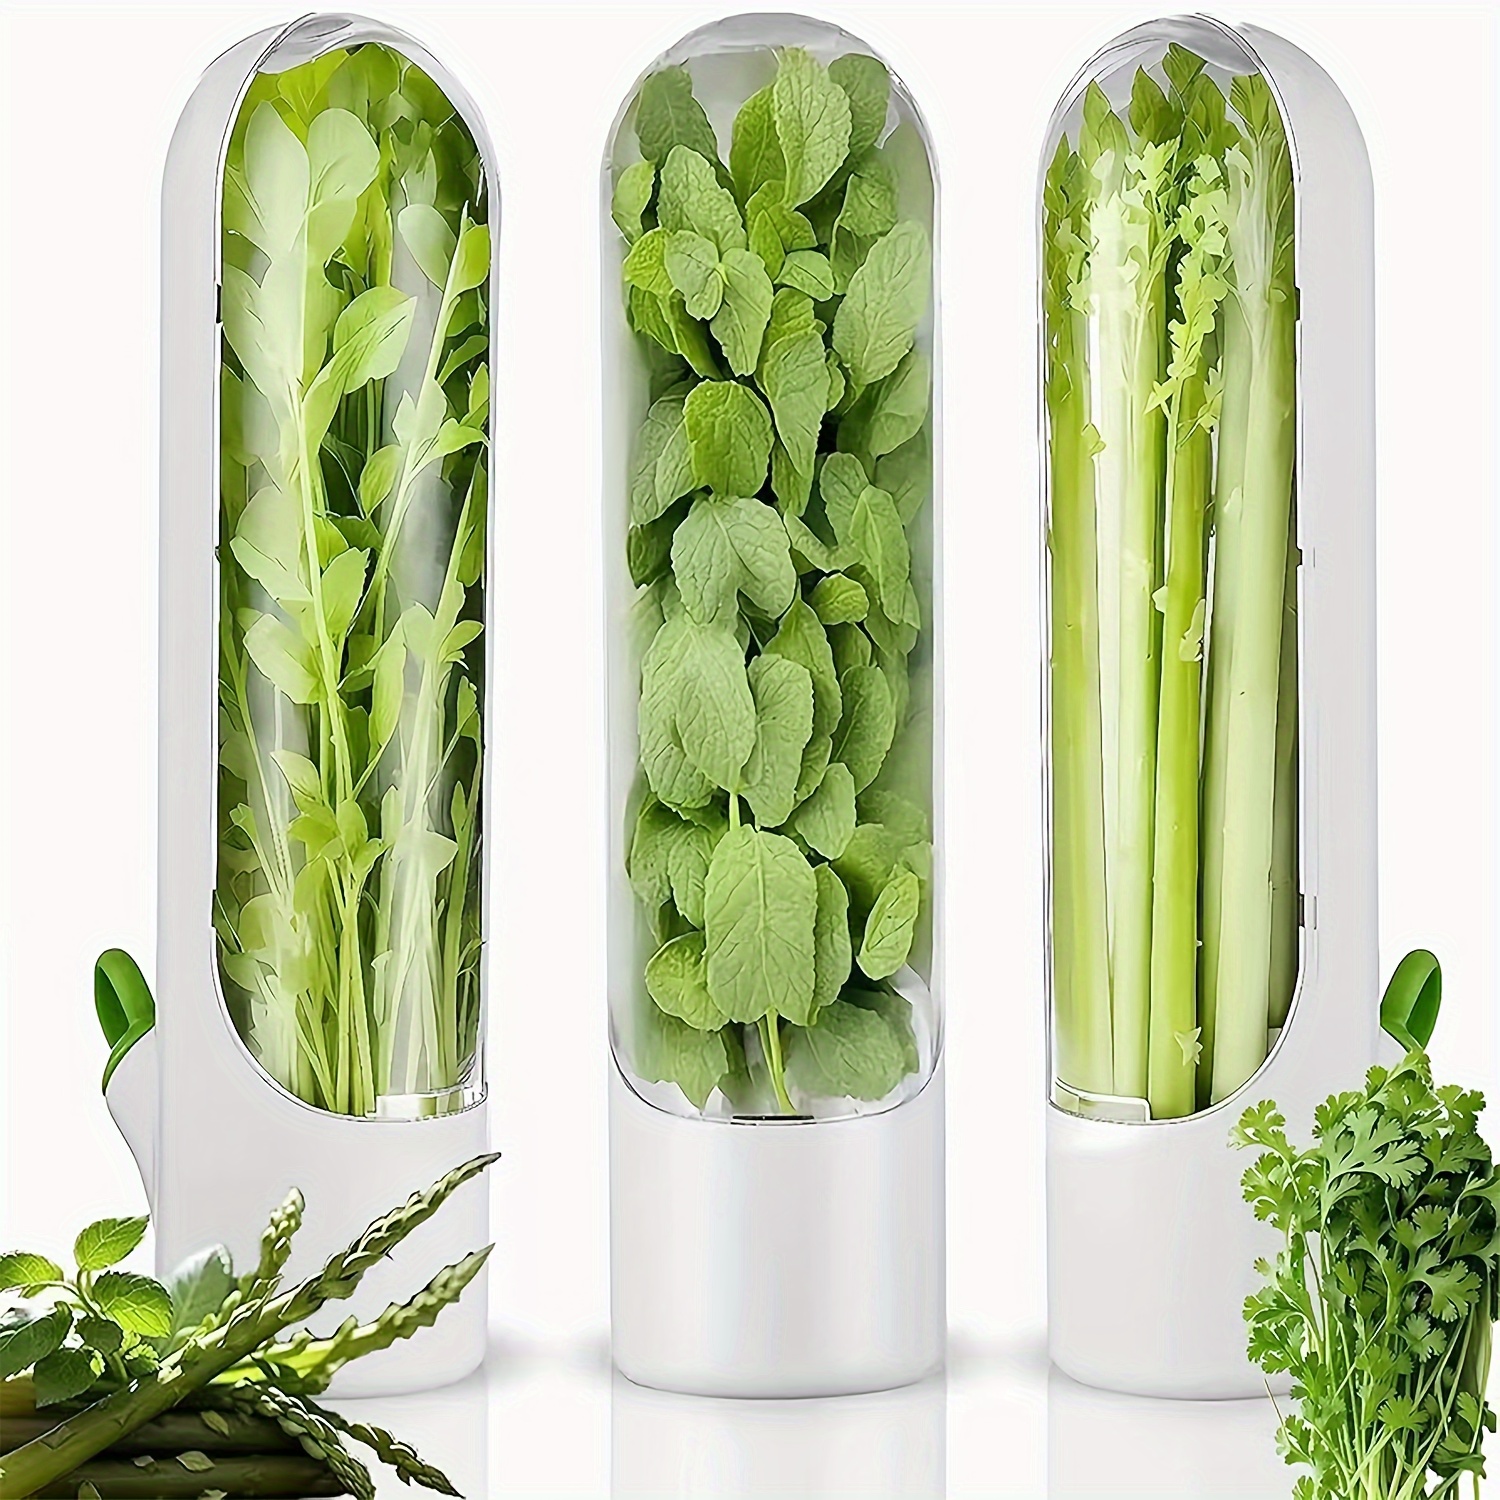 

1pc Herb Saver Pod For Refrigerator - Freshness Extender For Vegetables, Ideal For Mint, Cilantro, Parsley & Asparagus, Space-saving Kitchen Organizer, Plastic Food-safe Herb Storage Container